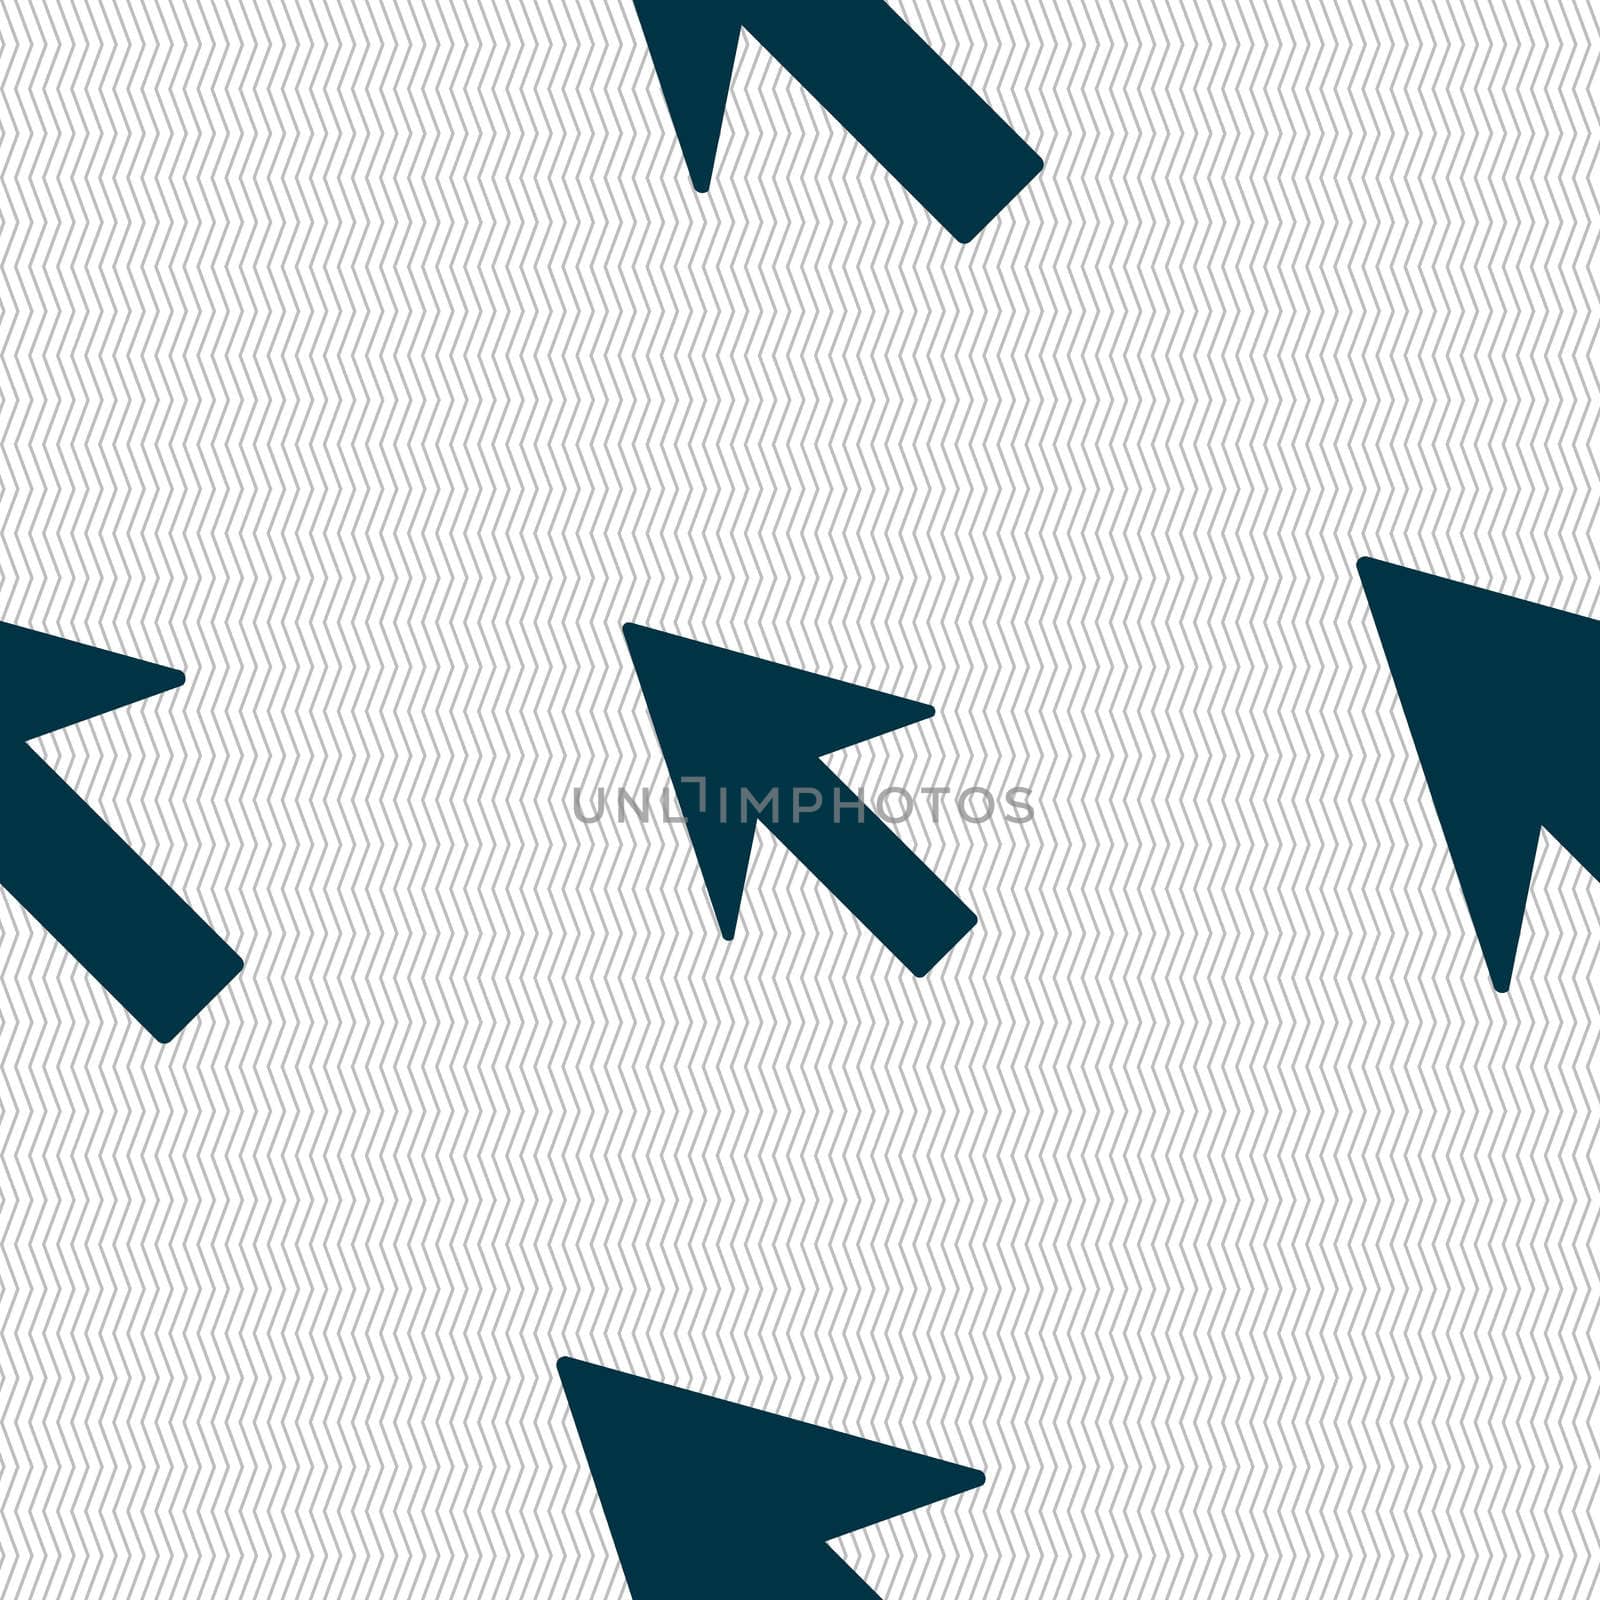 Cursor, arrow icon sign. Seamless abstract background with geometric shapes.  by serhii_lohvyniuk